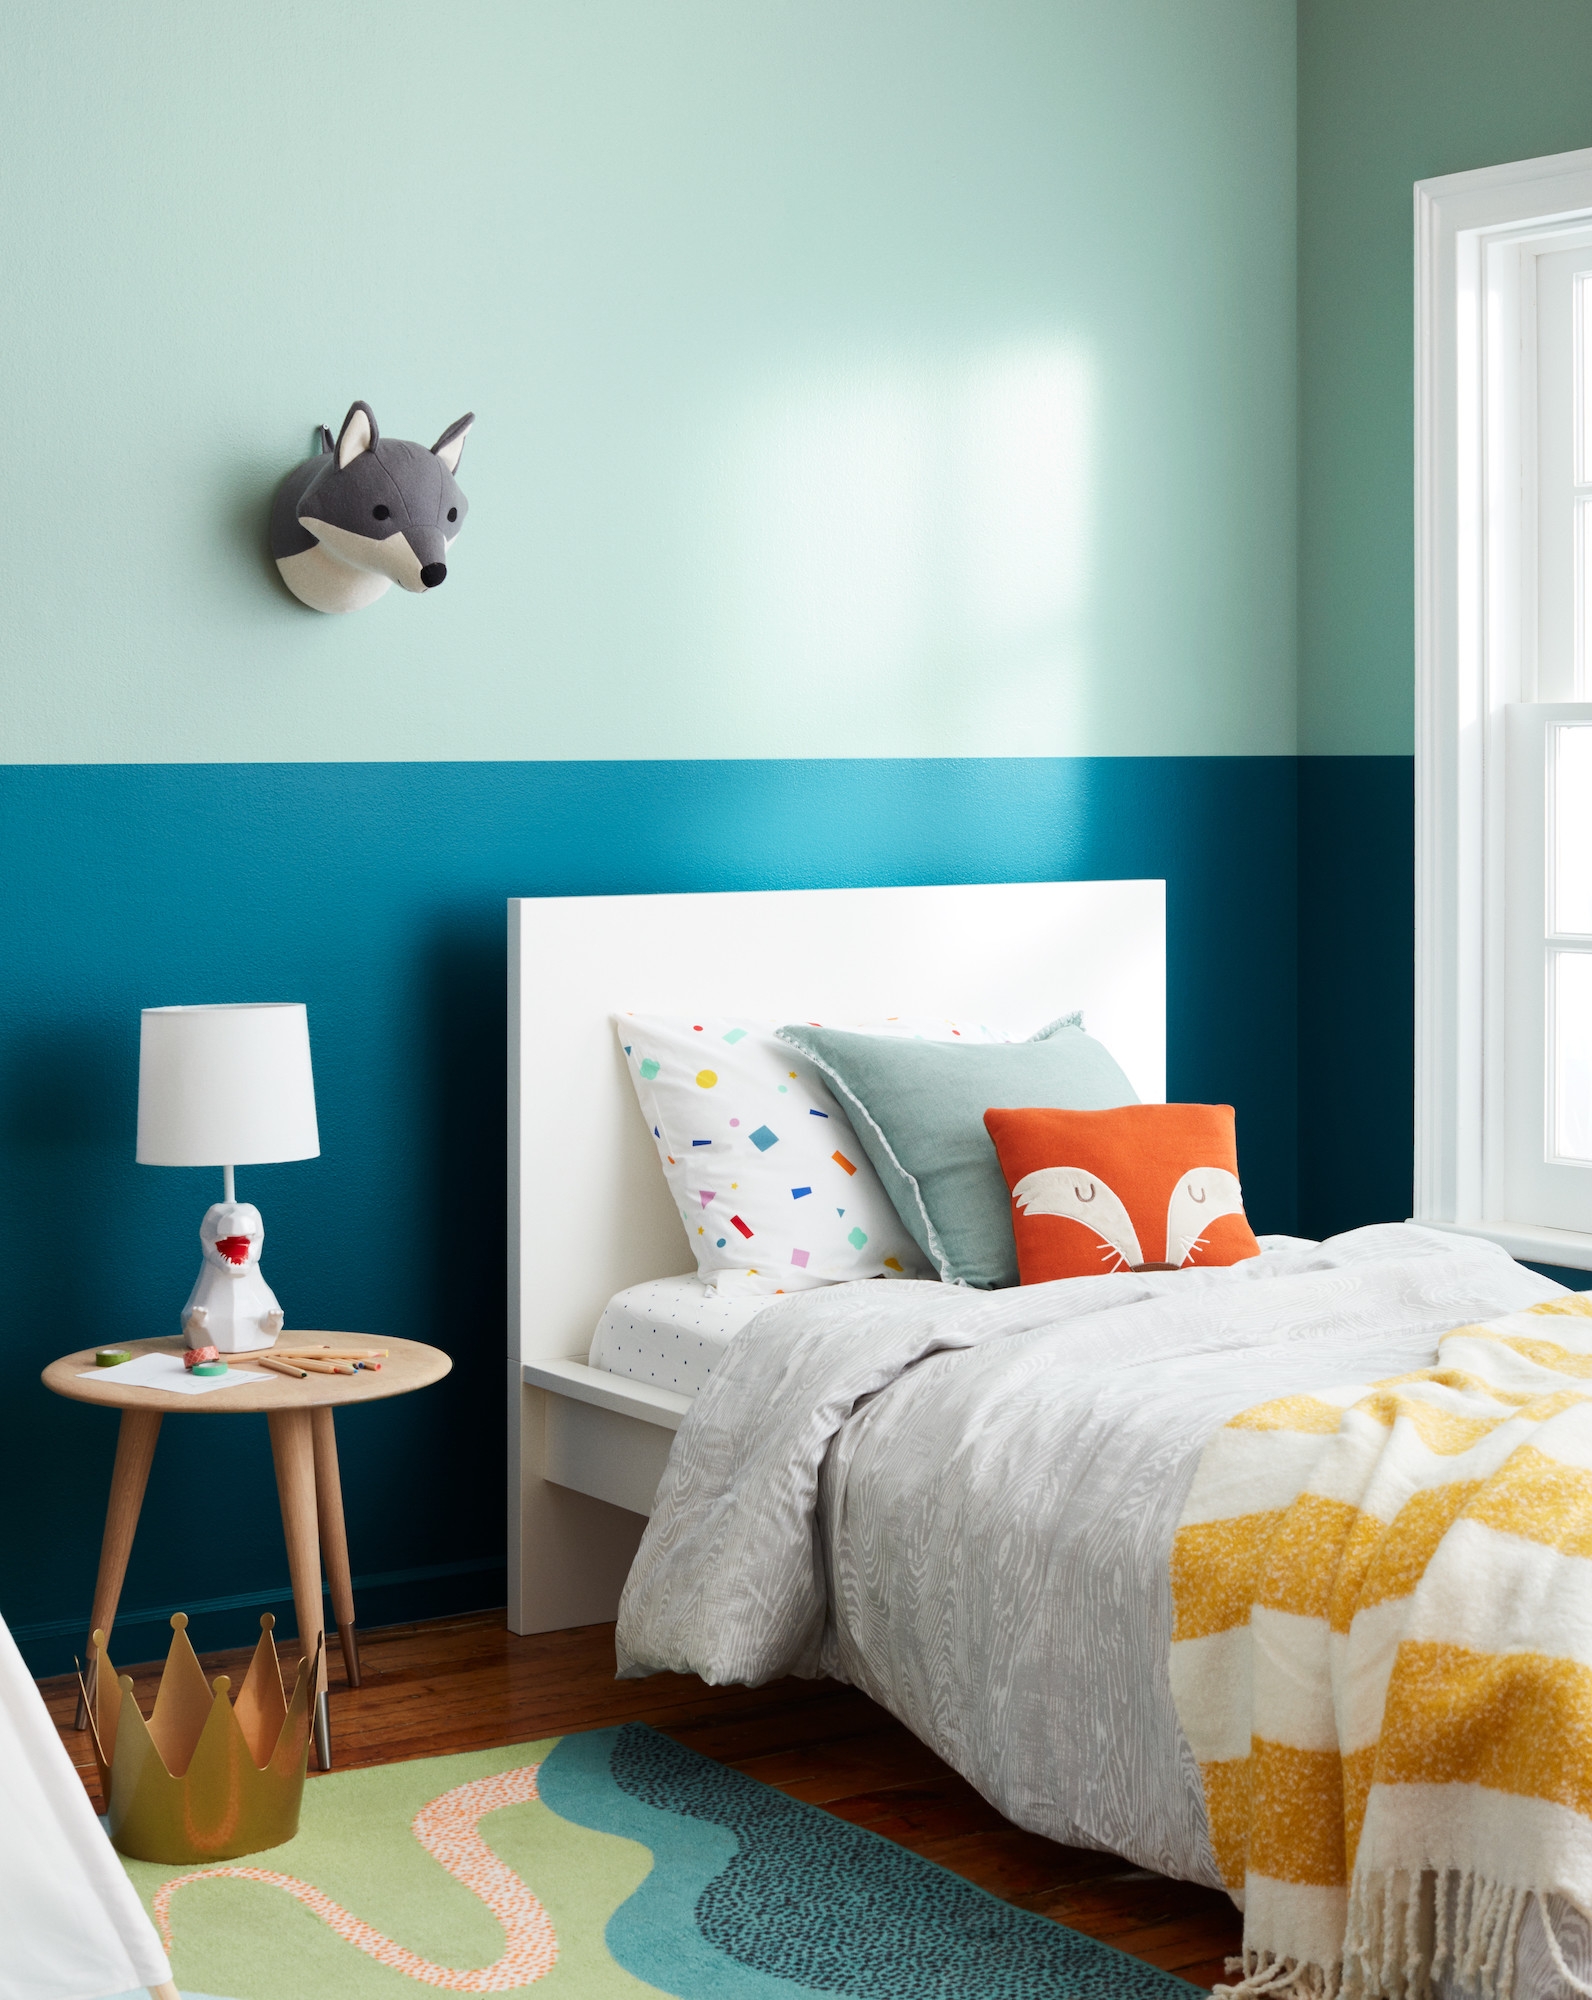 Clare Paint - Sublime - Wall Swatch - Image 2